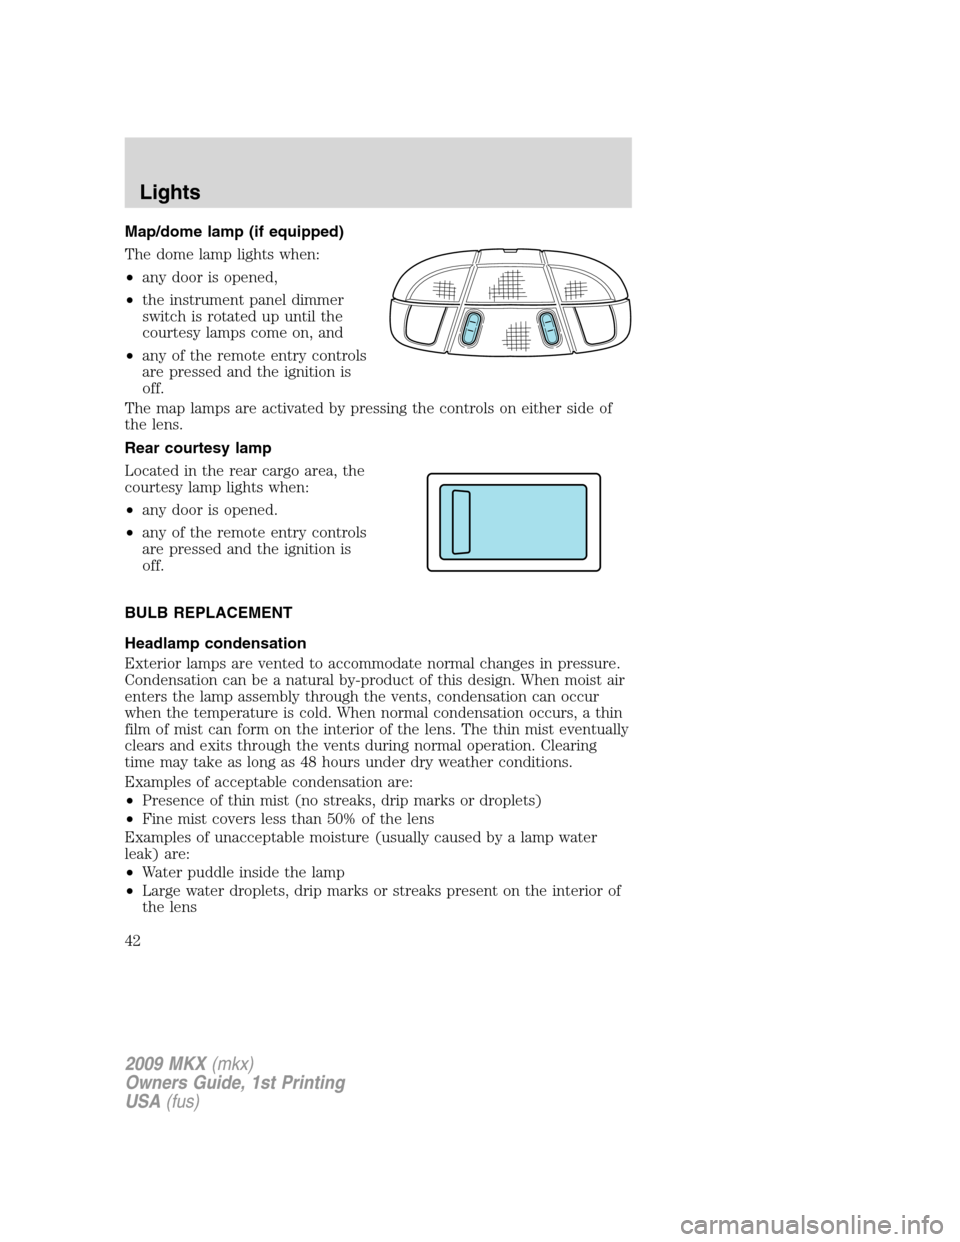 LINCOLN MKX 2009  Owners Manual Map/dome lamp (if equipped)
The dome lamp lights when:
•any door is opened,
•the instrument panel dimmer
switch is rotated up until the
courtesy lamps come on, and
•any of the remote entry contr